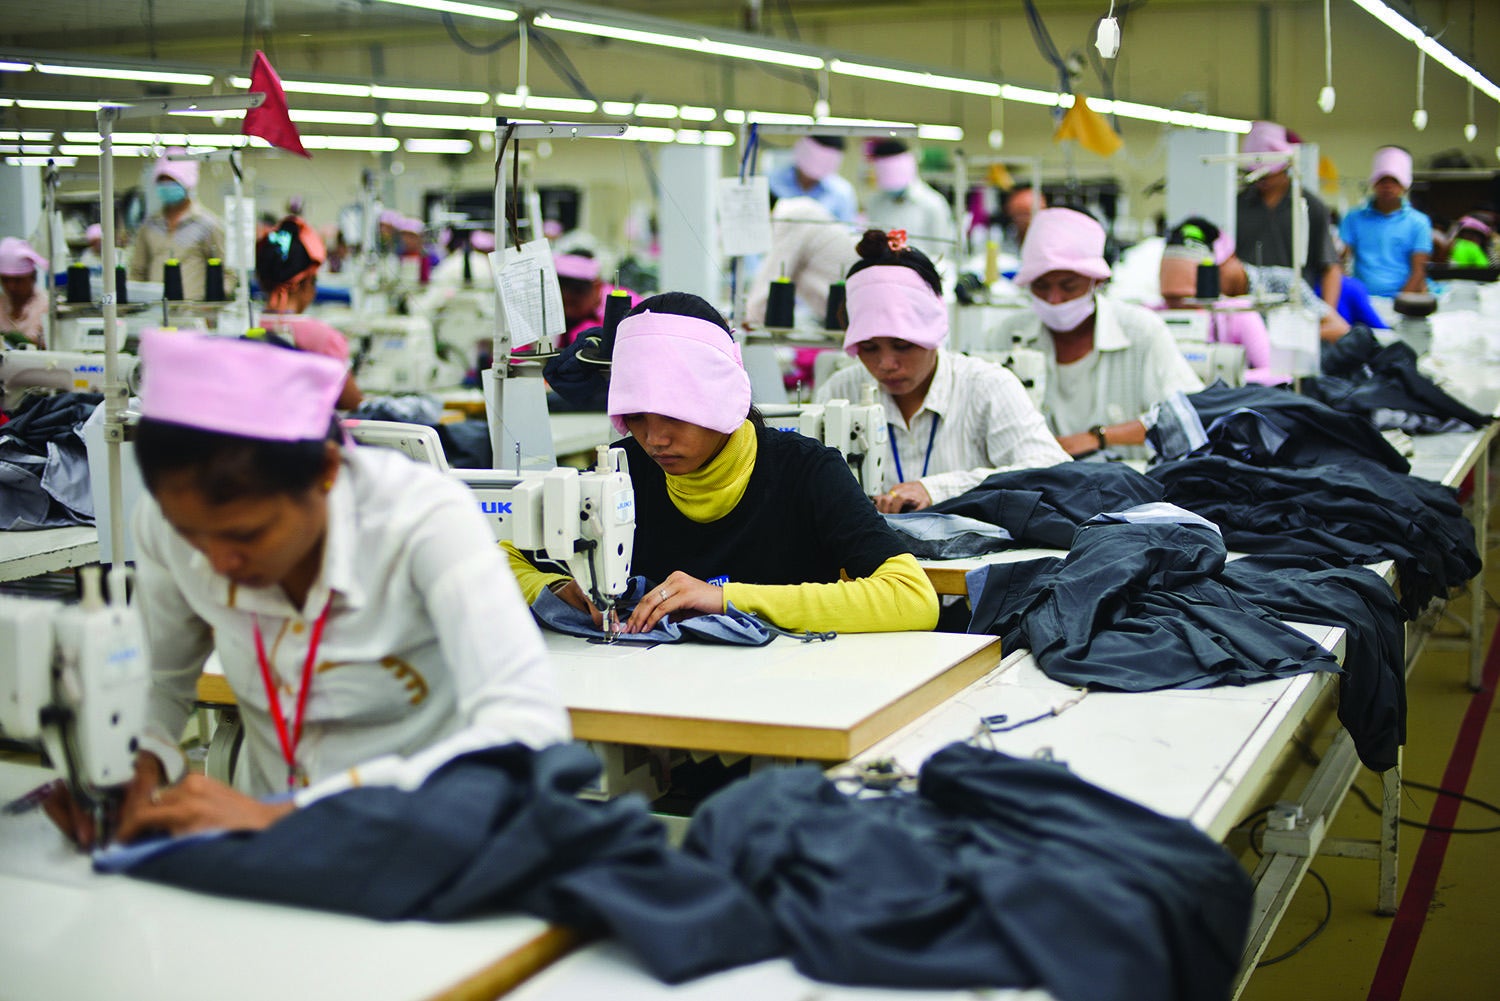 Women work in the sewing division of a factory in Phnom Penh, Cambodia’s capital.